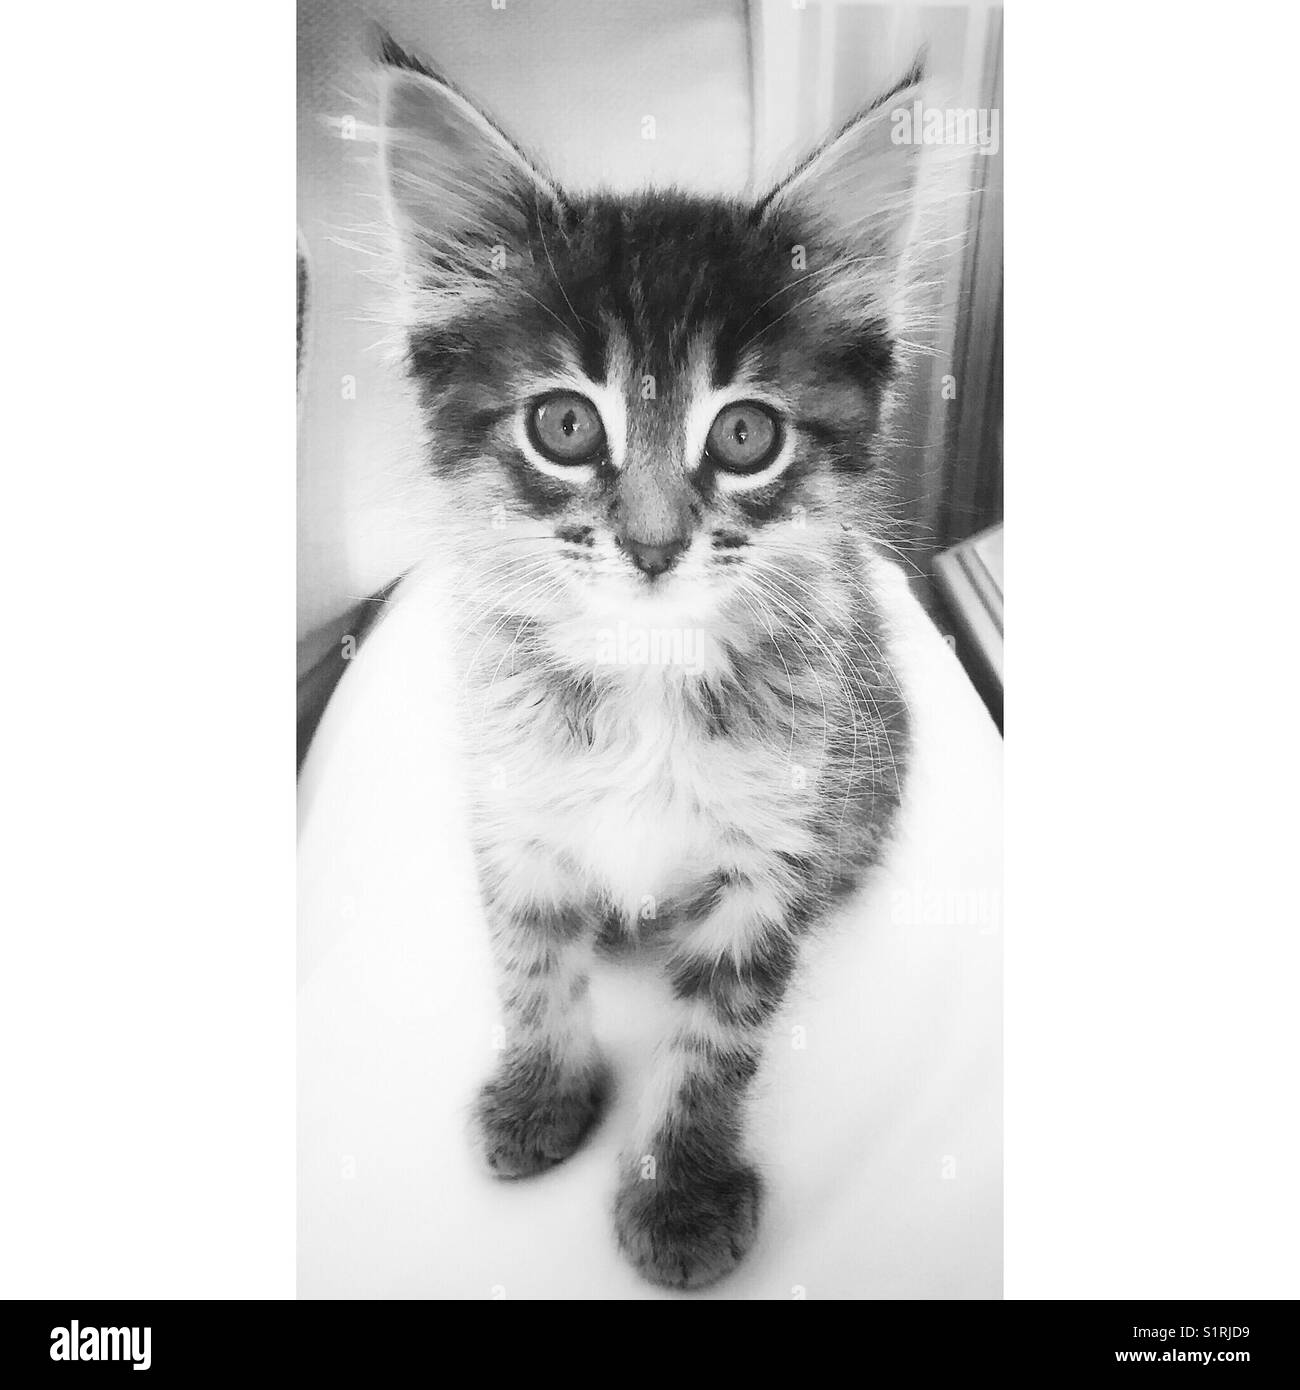 Cute, furry, big eyed kitten in black and white Stock Photo